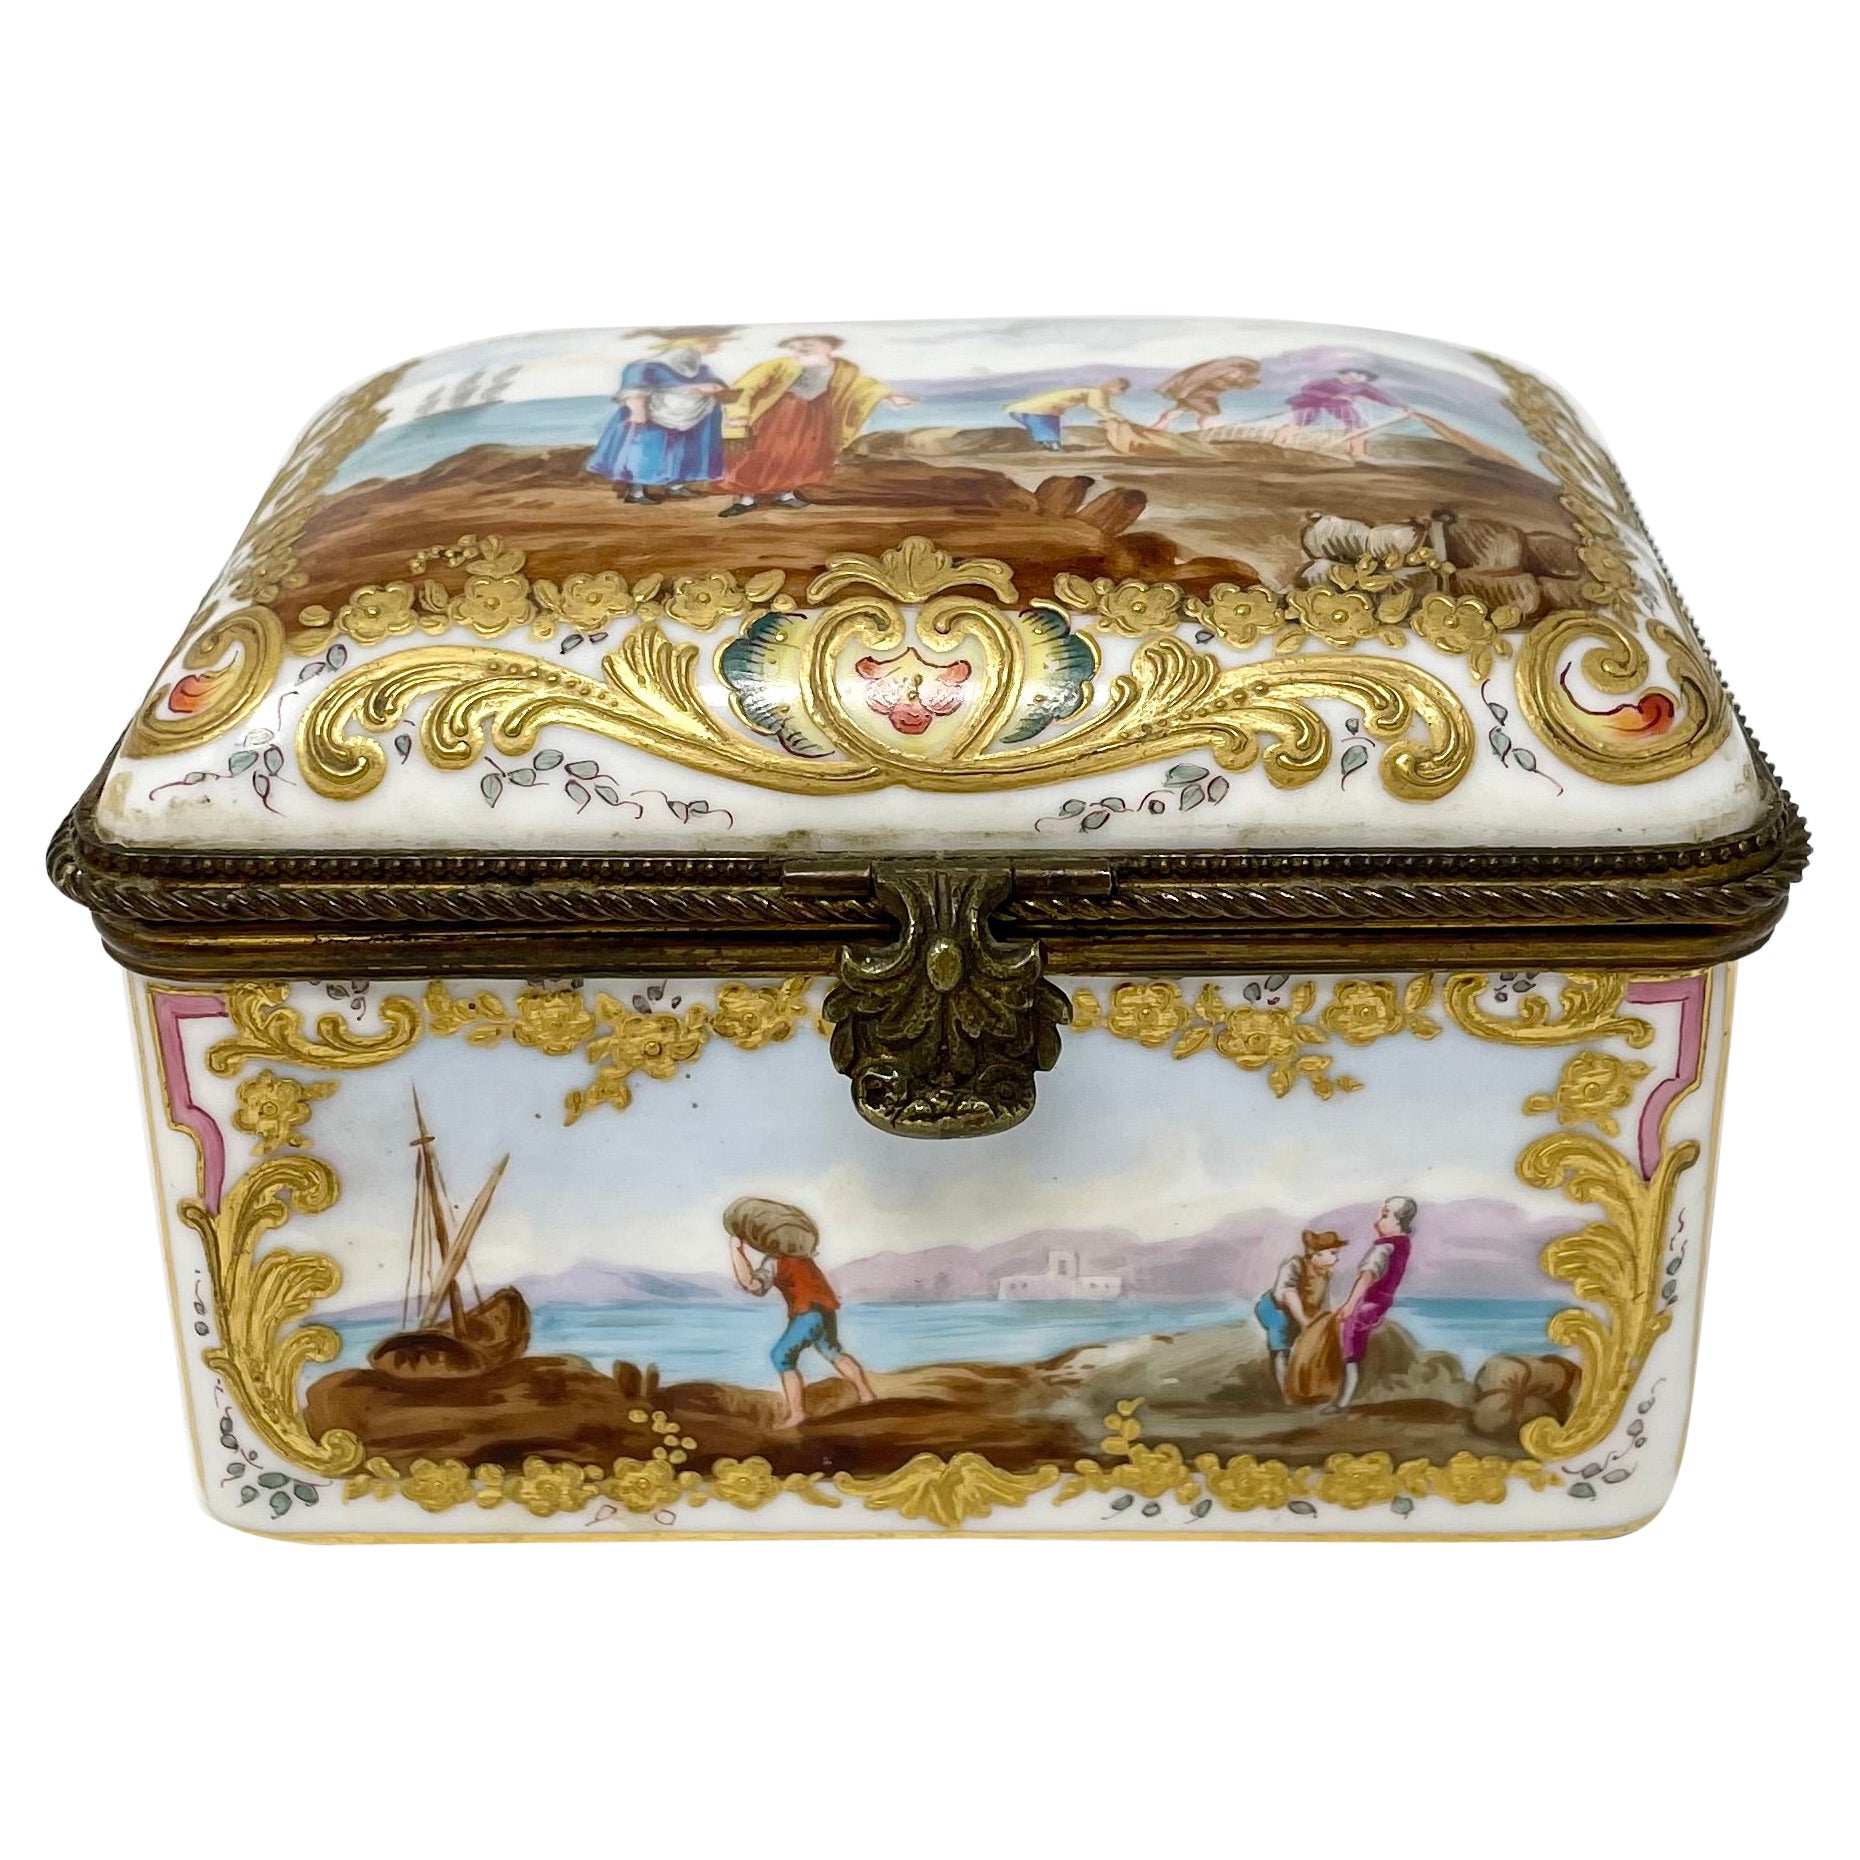 Antique German Dresden Porcelain Box with Delicate Painting, Circa 1860-1870. For Sale